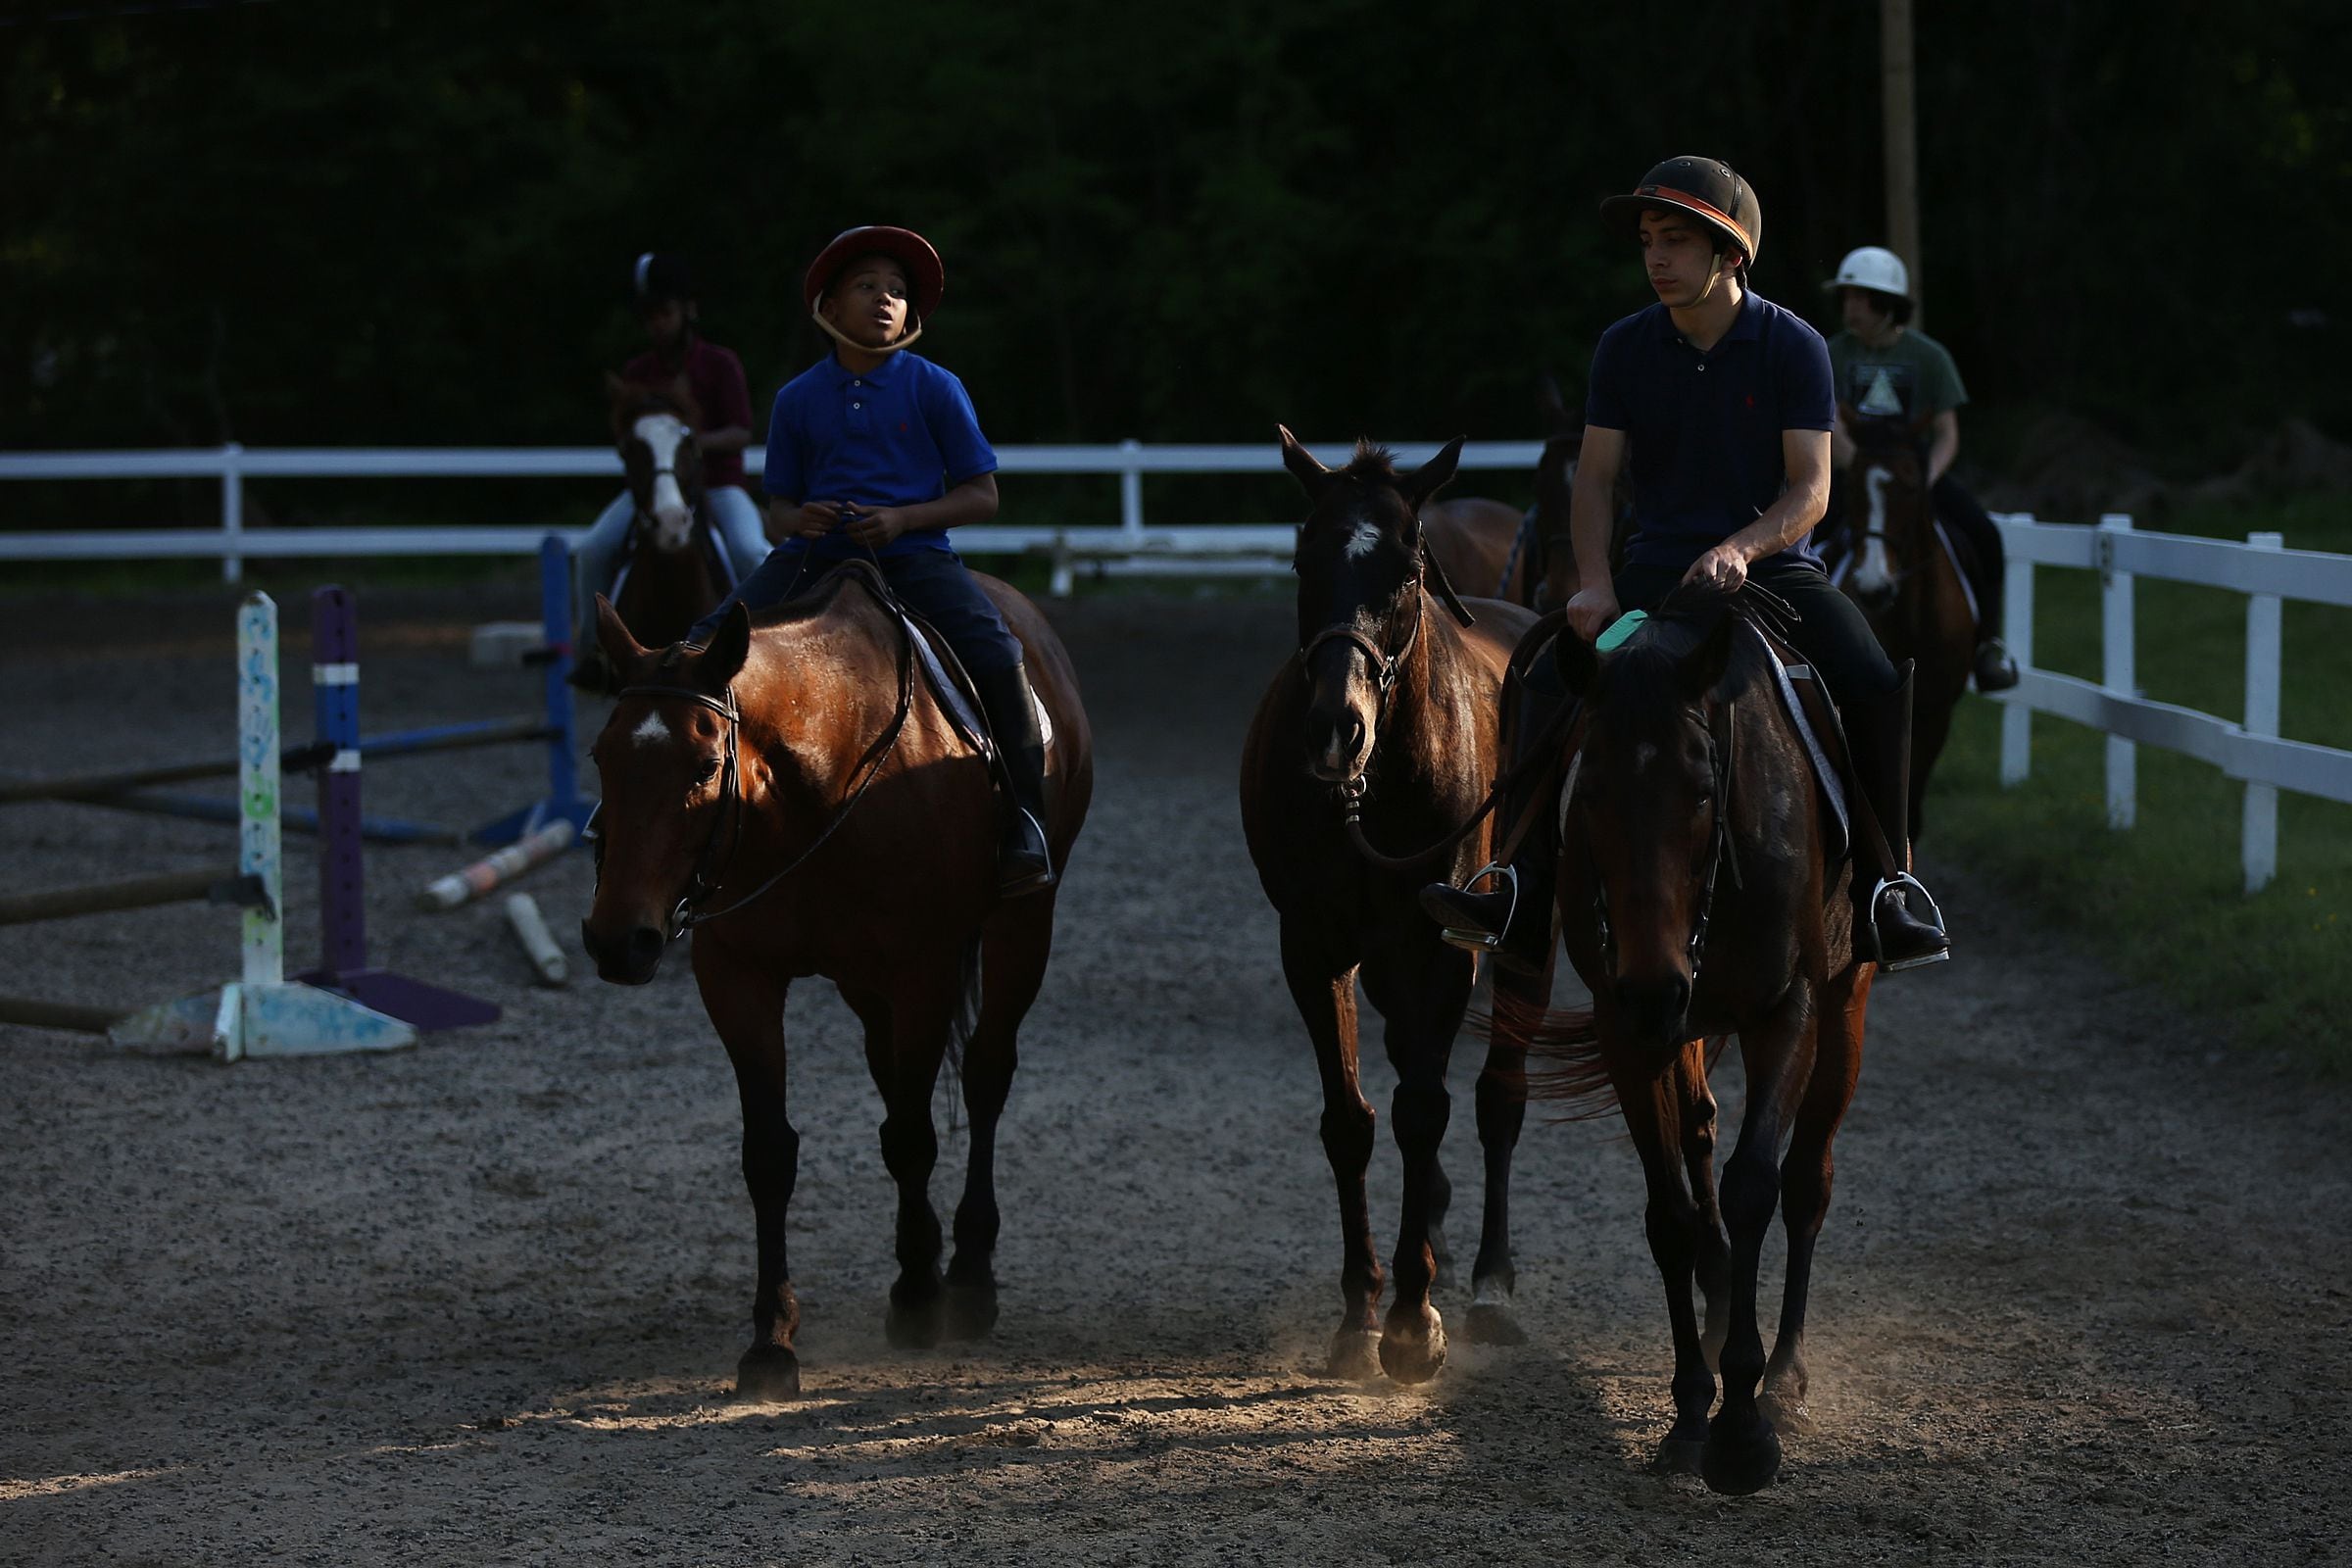 Philadelphia Teens 'Work To Ride' And Change The Face Of Polo : NPR